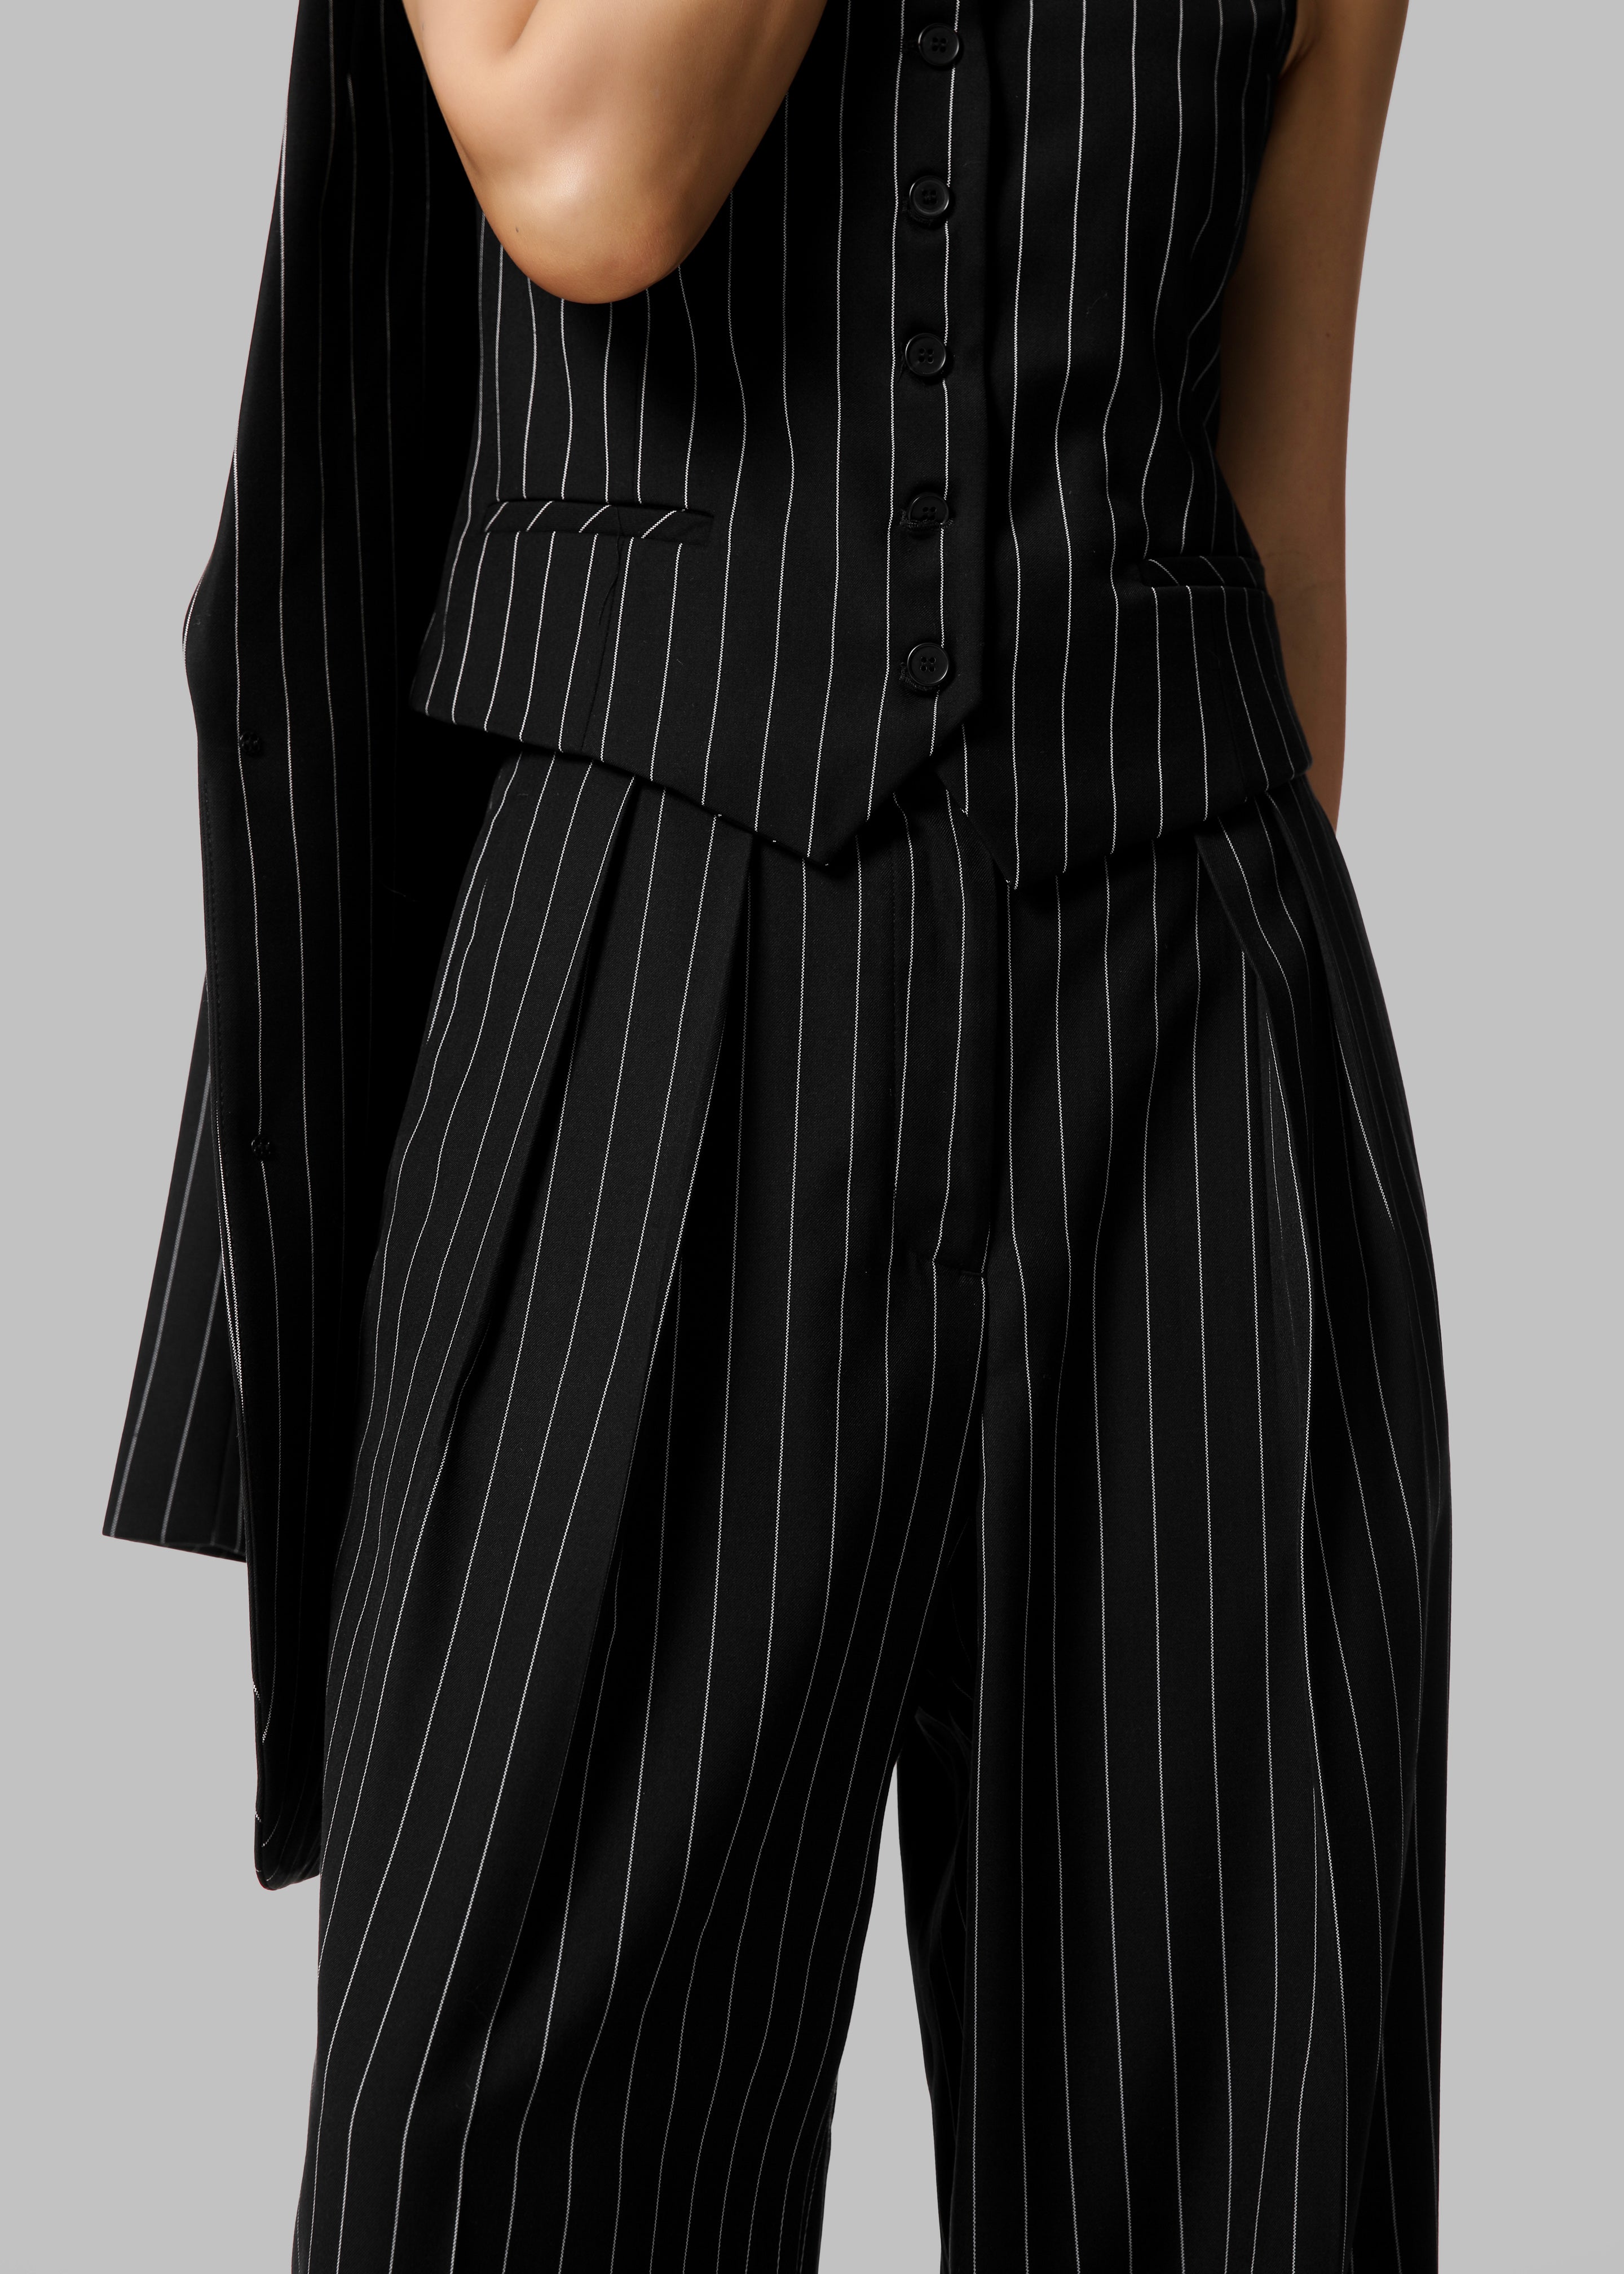 Holland Pleated Trousers - Black/White Pinstripe - 4